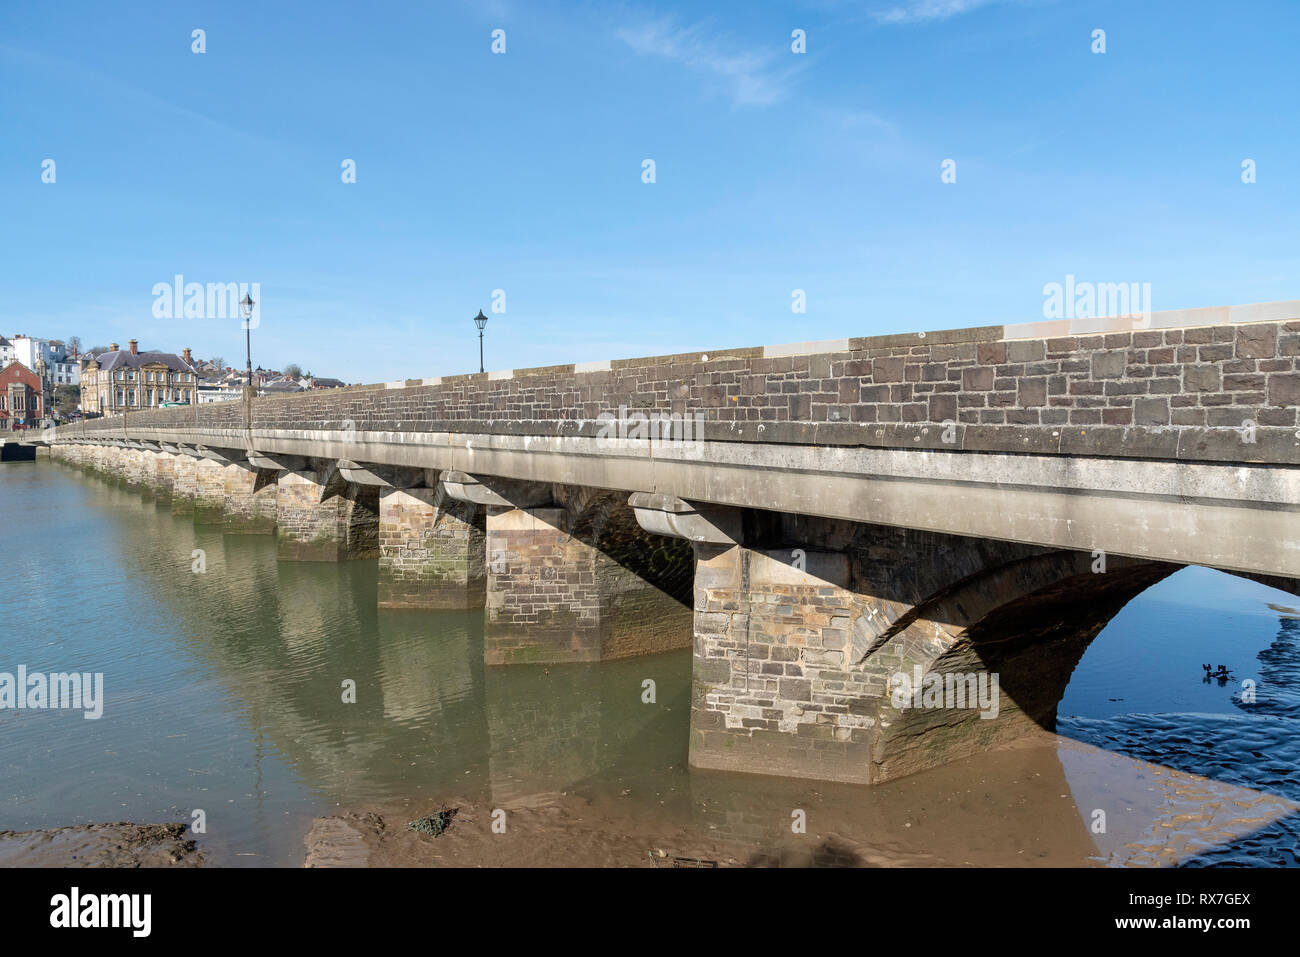 Bideford, North Devon, England UK. March 2019. Bideford town and the Bideford Long bridge built in 1850 viewed from East the Water. Stock Photo